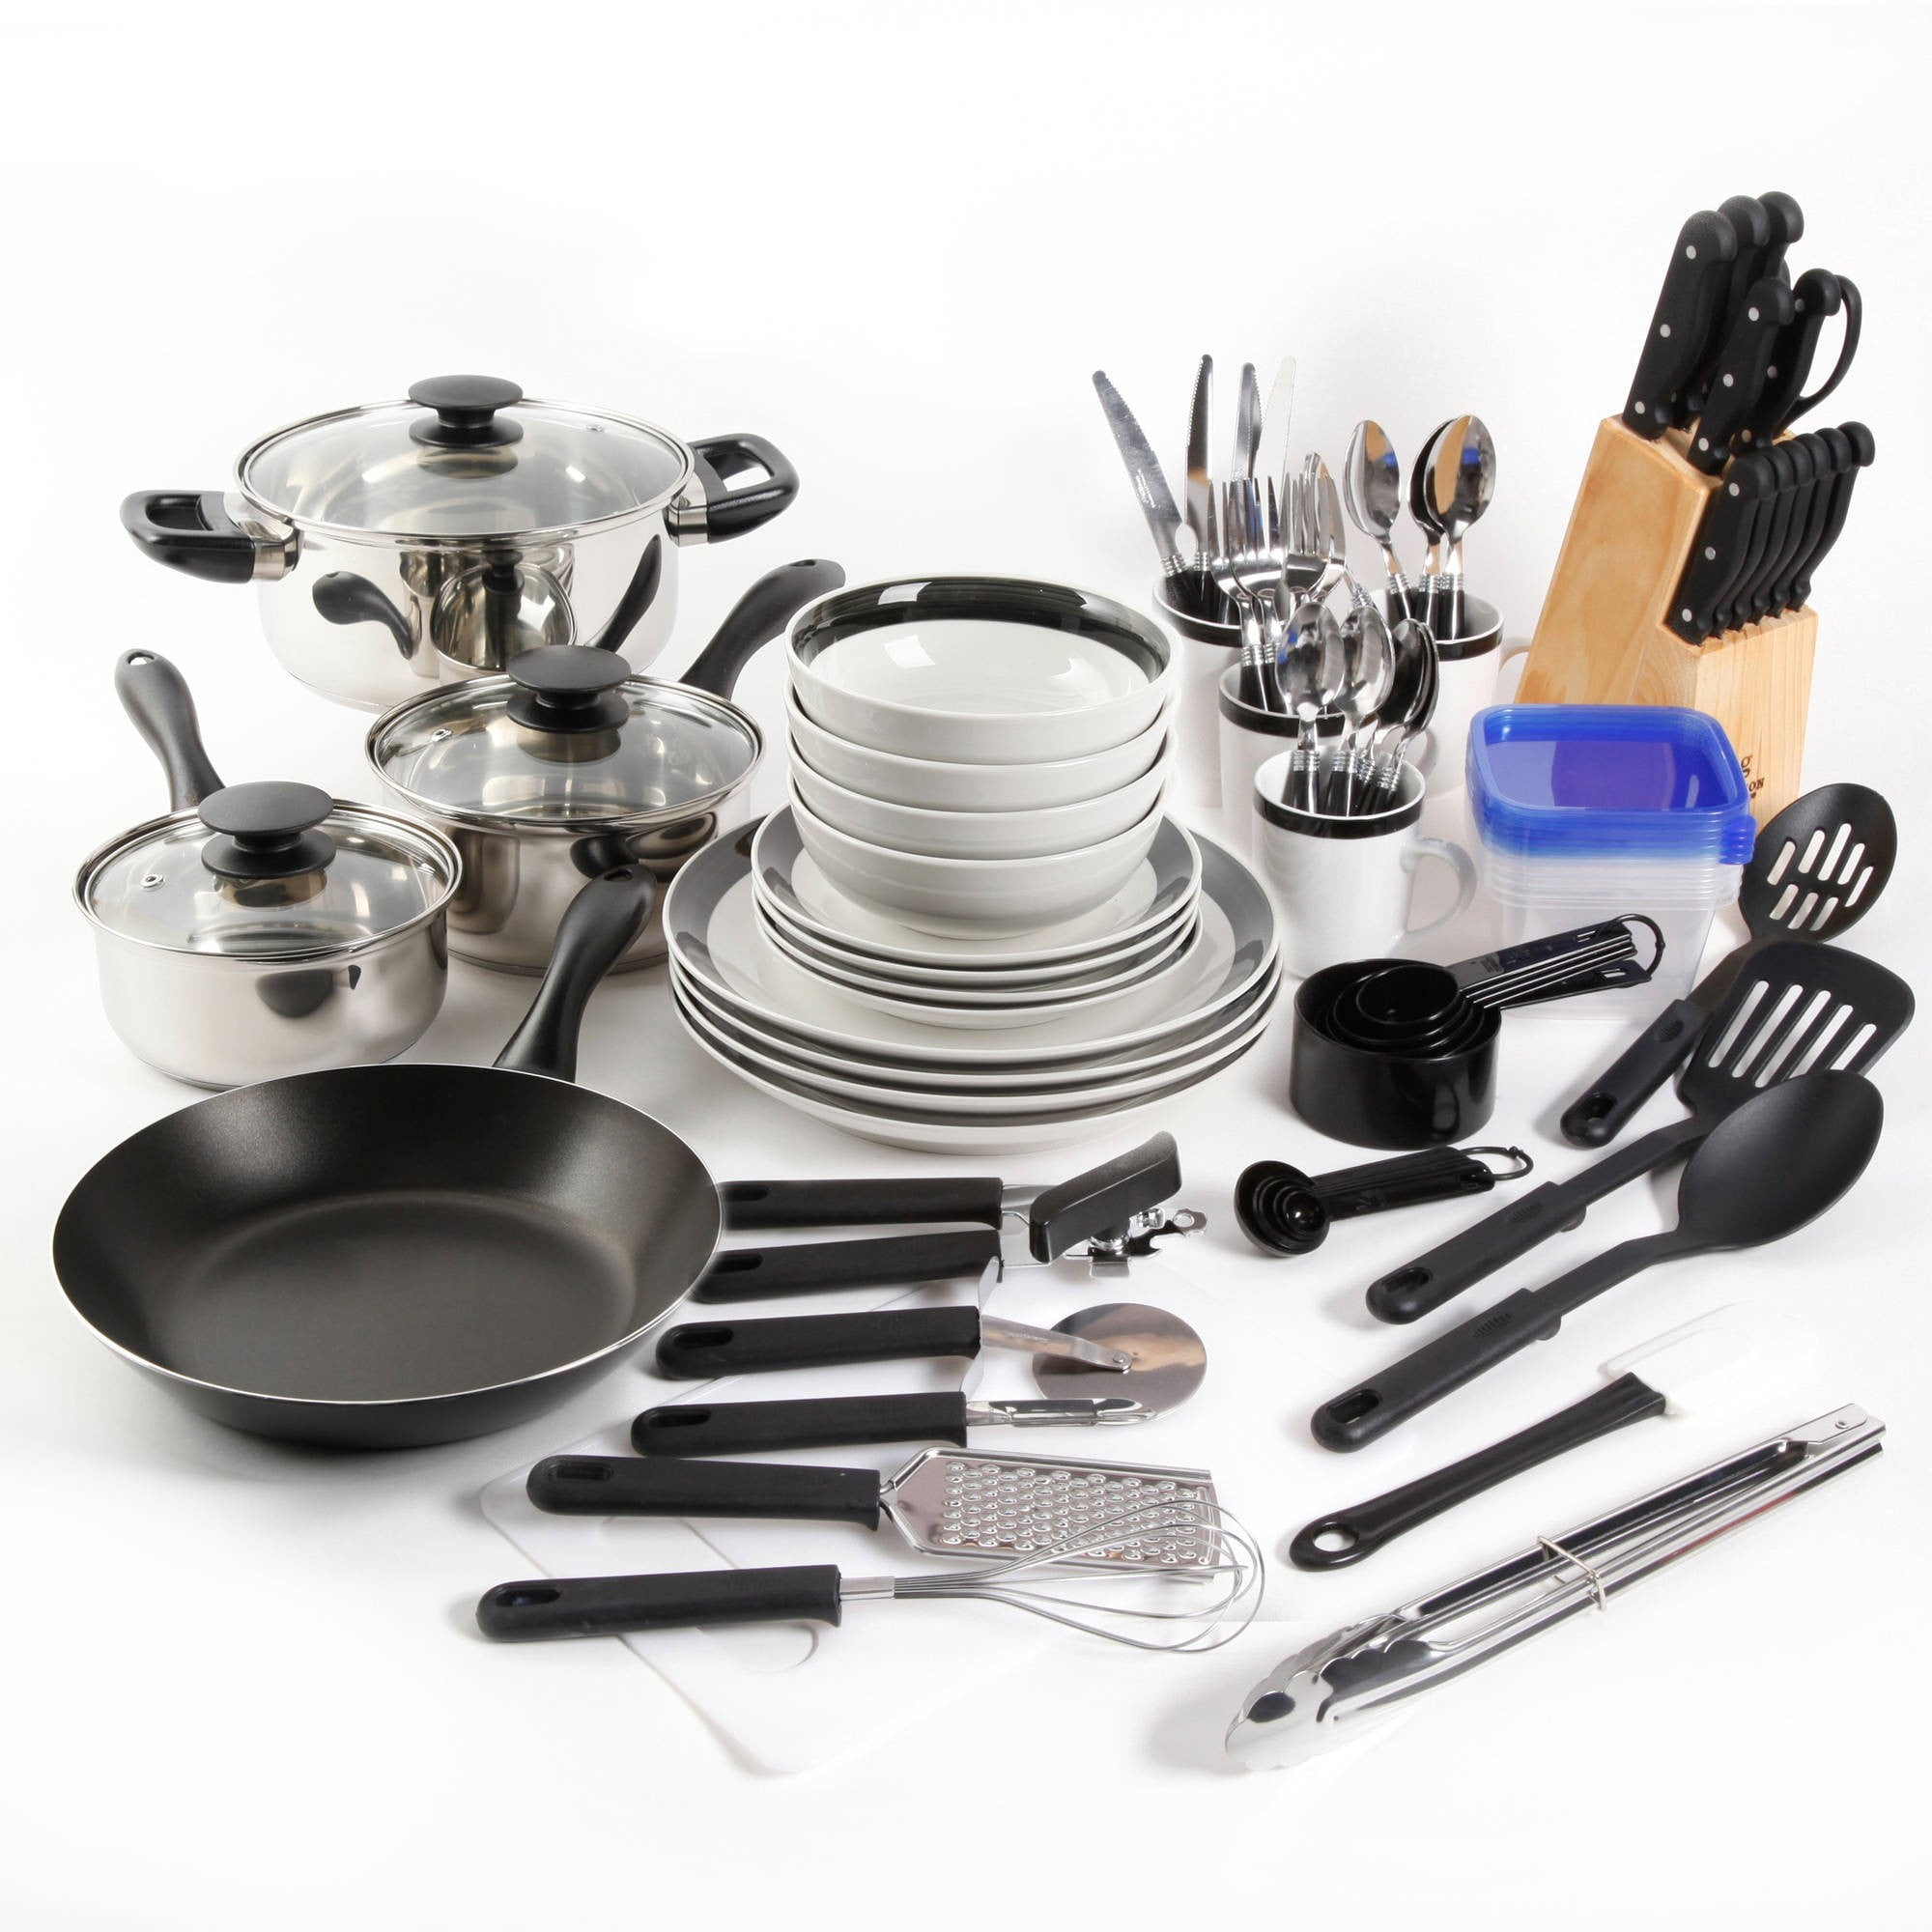 This $30 Cooking Utensil Set Is Perfect for First Apartments – SheKnows